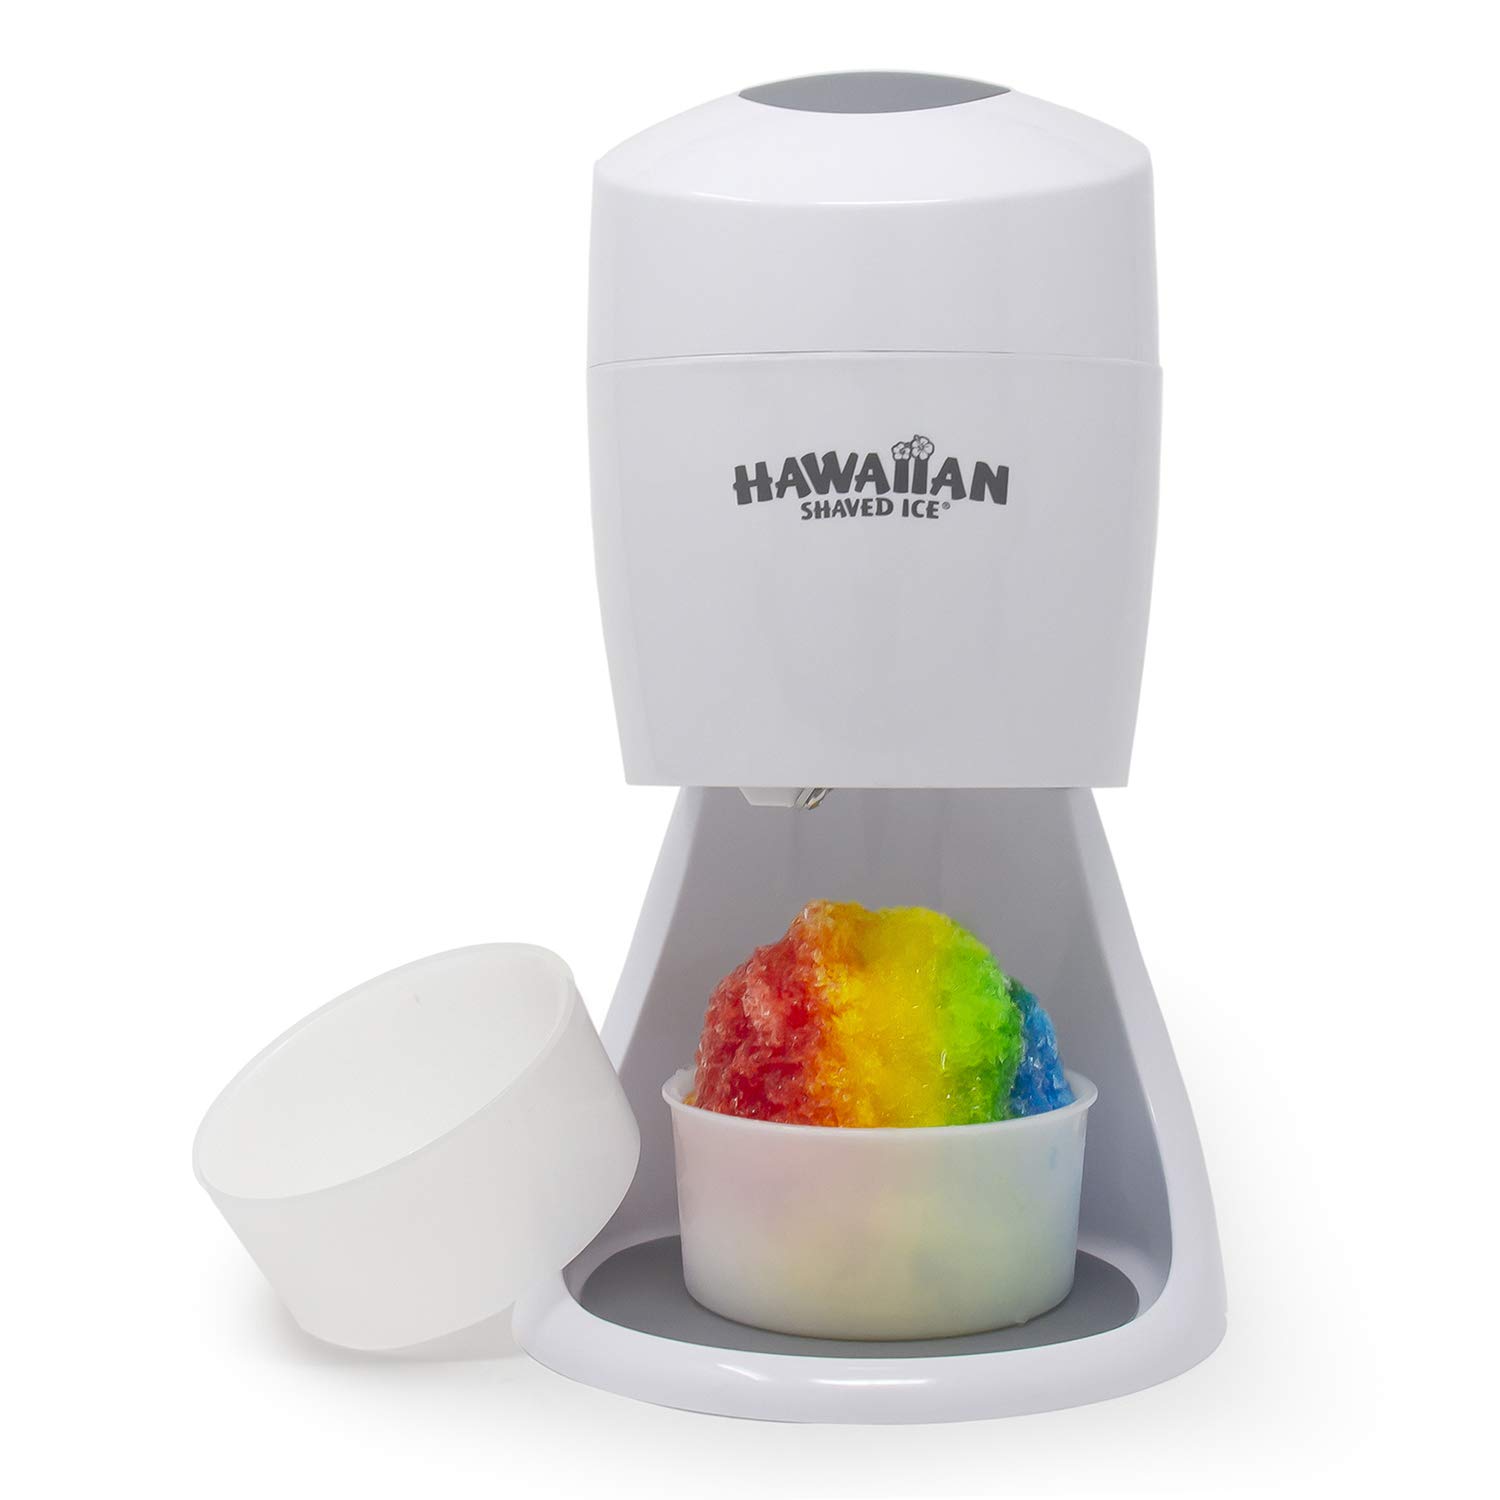 Hawaiian Shaved Ice Electric Shaved Ice Maker (S900A) Perfect for Cool Summer Treats